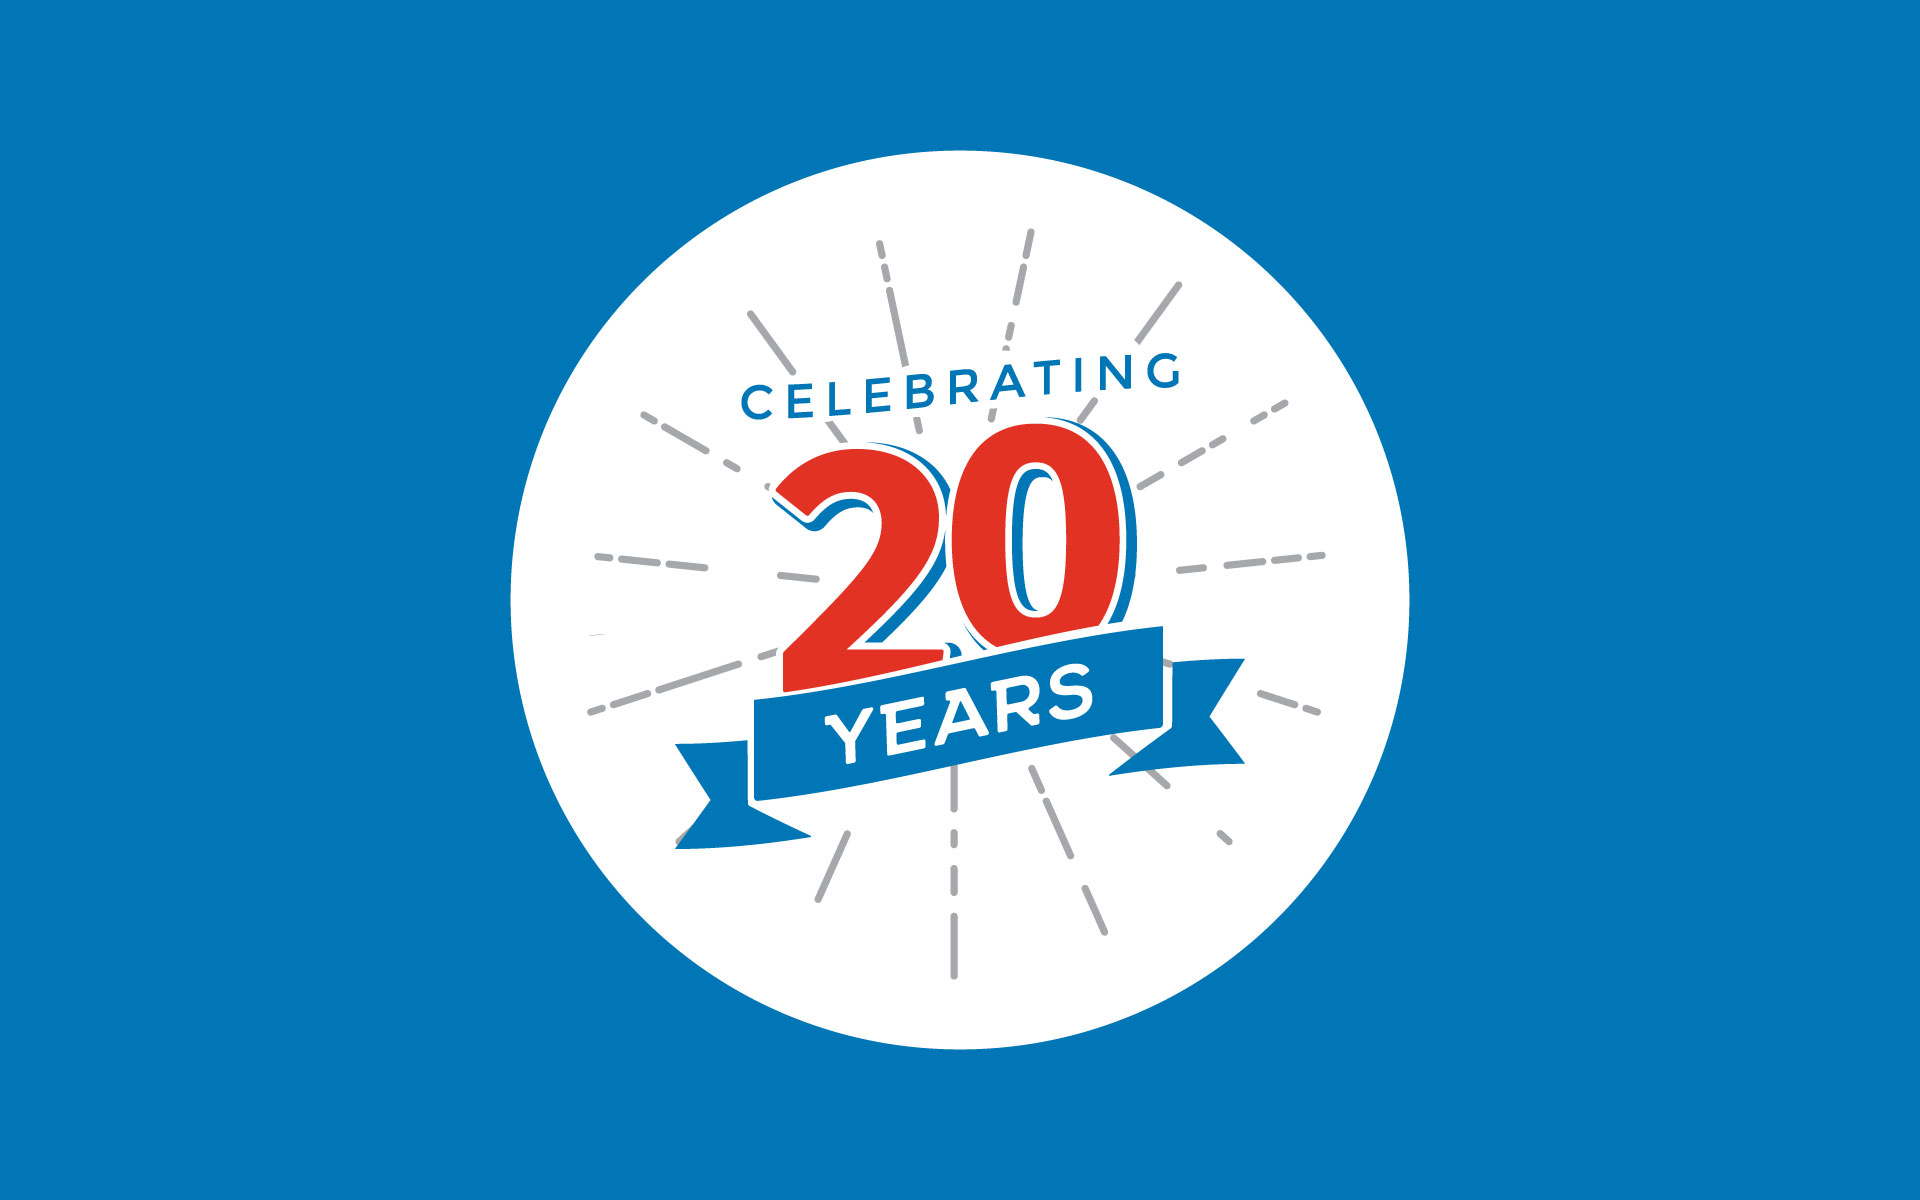 KidsCare Home Health: Celebrating 20 Years of Excellence